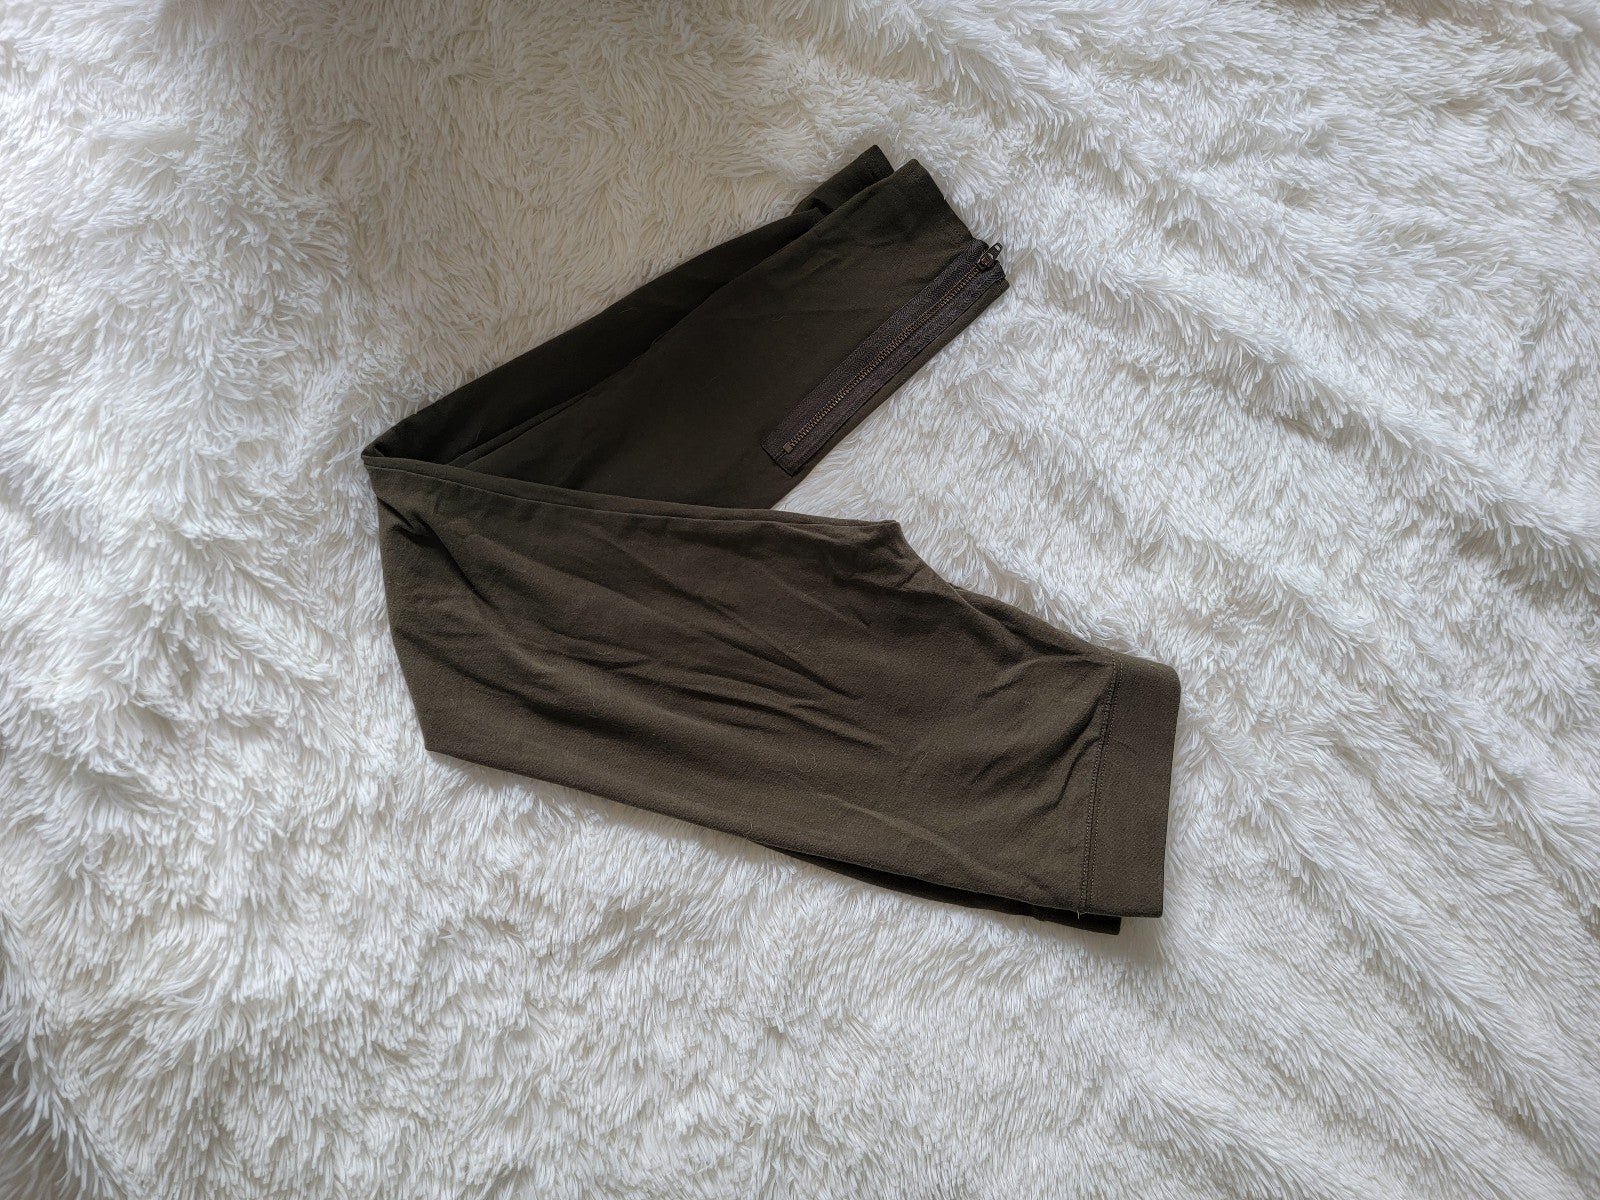 cheapest place to buy  American Eagle Leggings JJsXtl4w